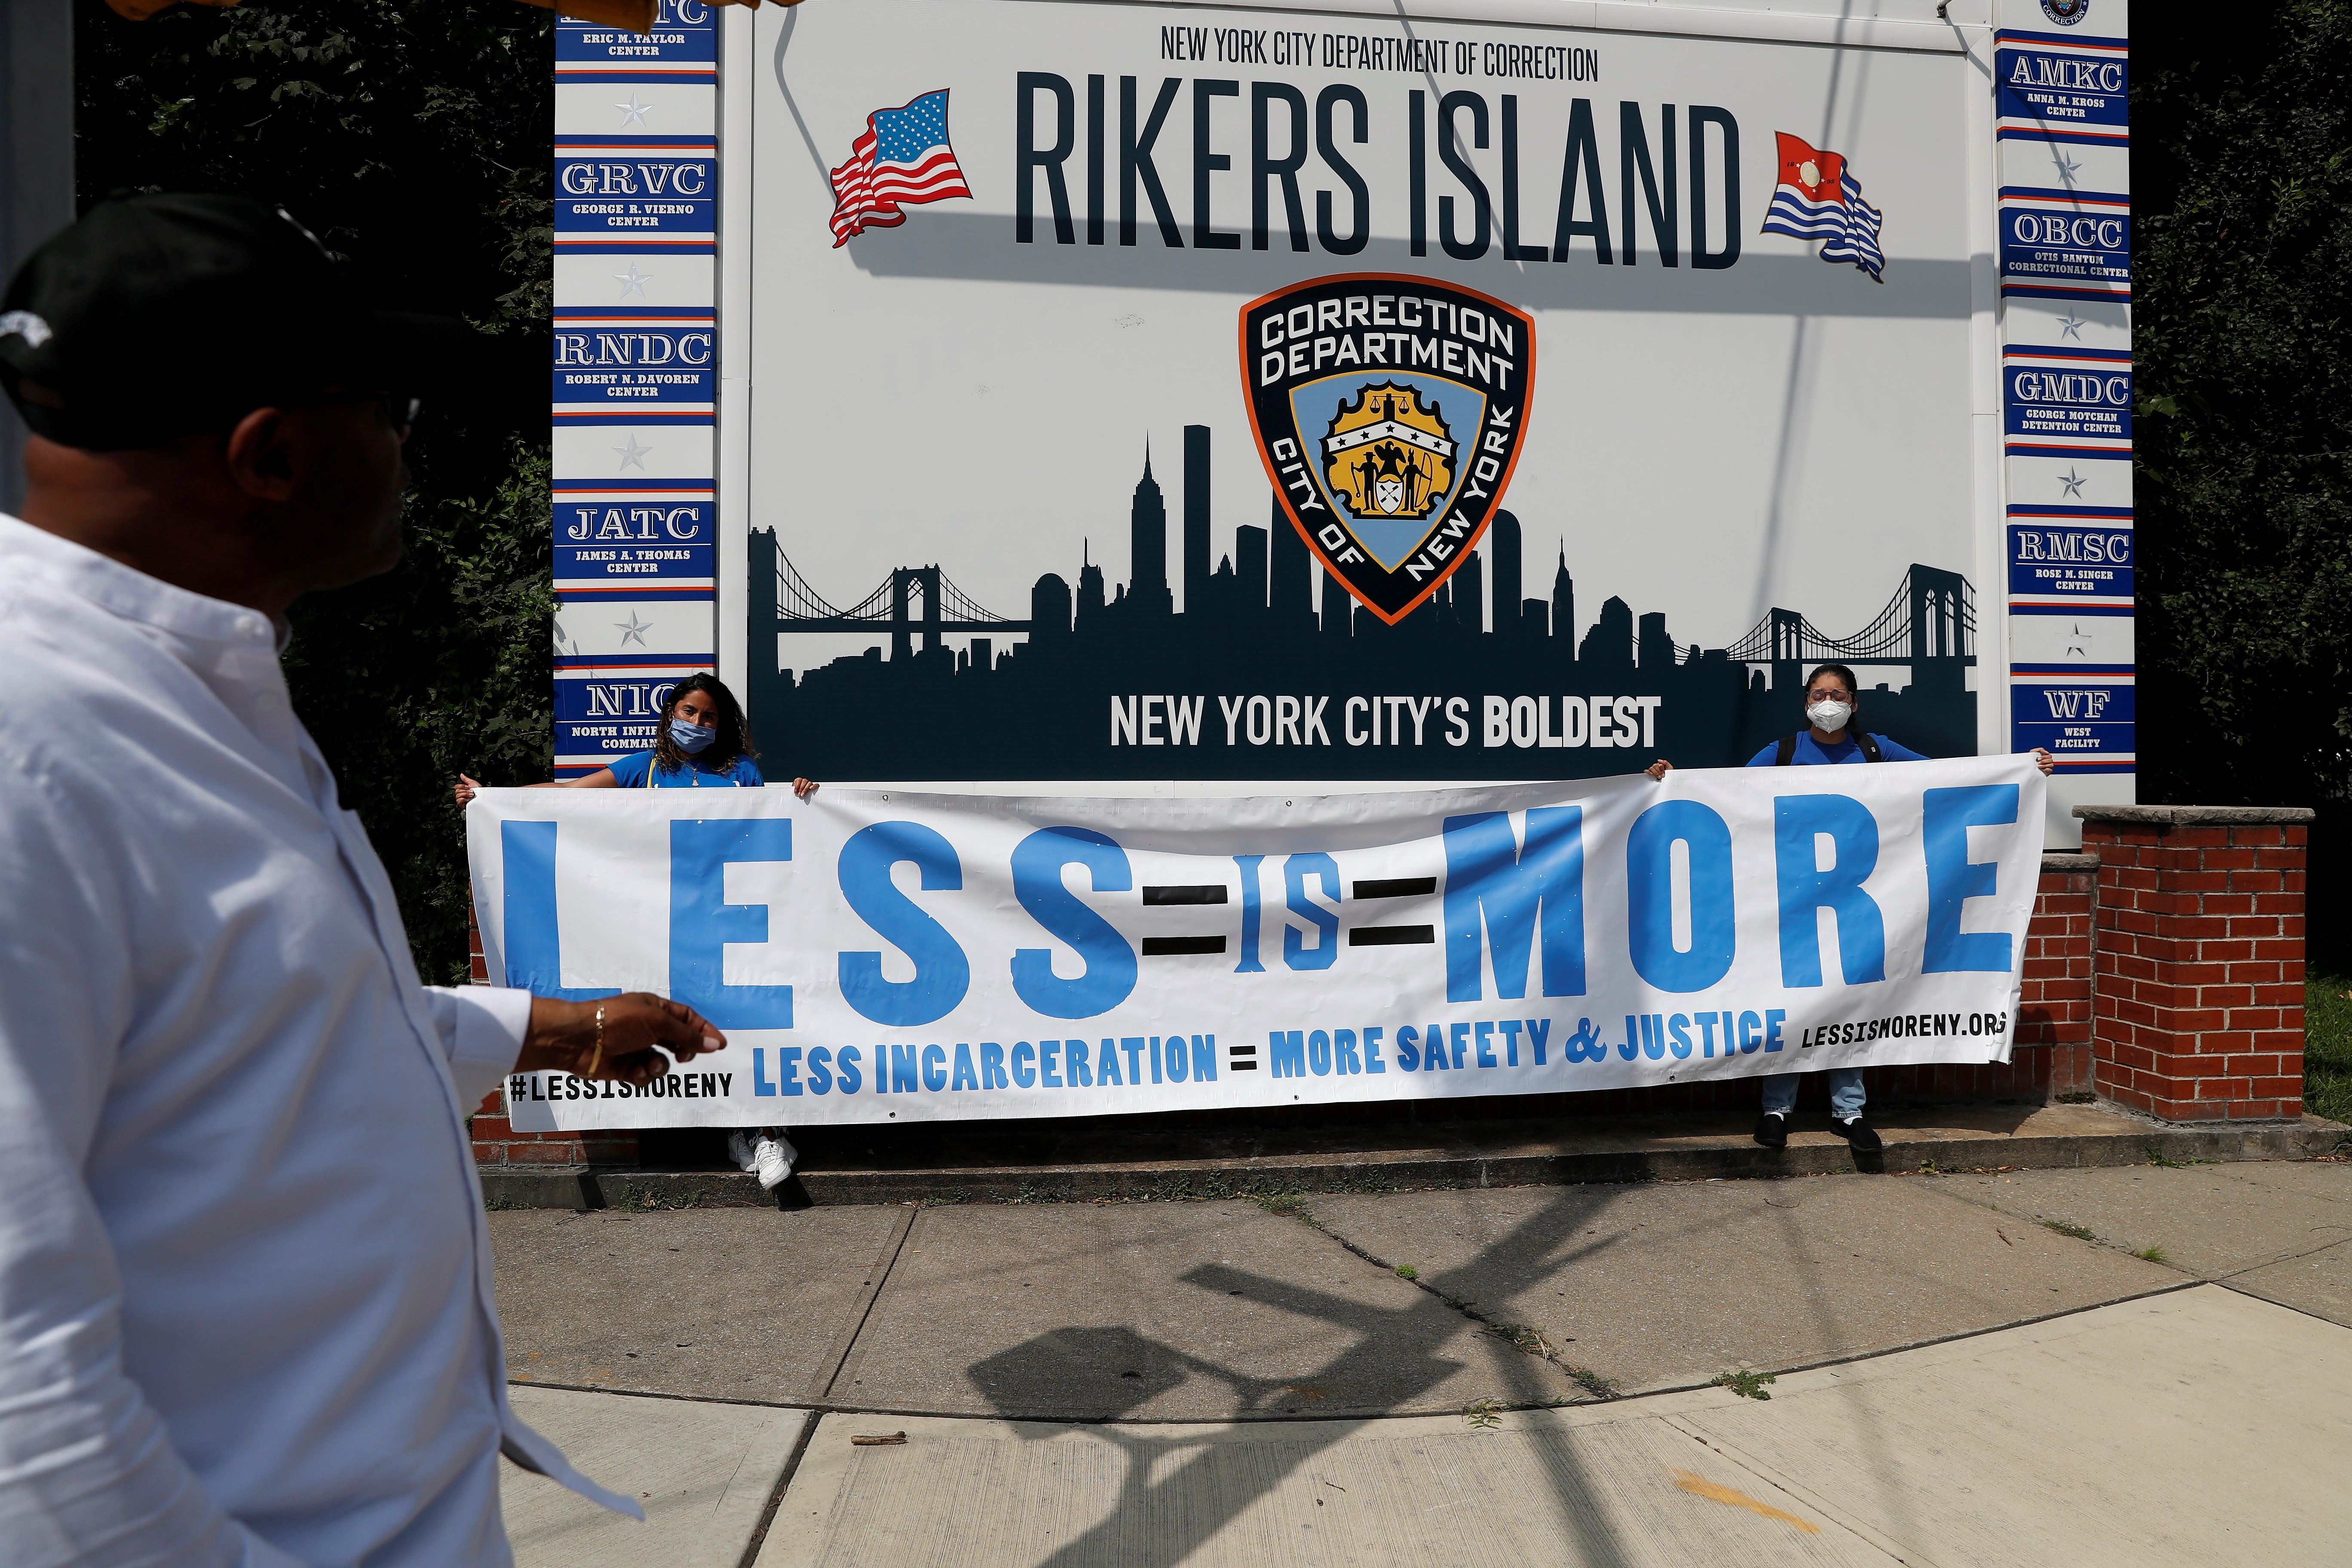 Protests hold up a large banner that says, "Less Is More" in front of the sign for Rikers Island.